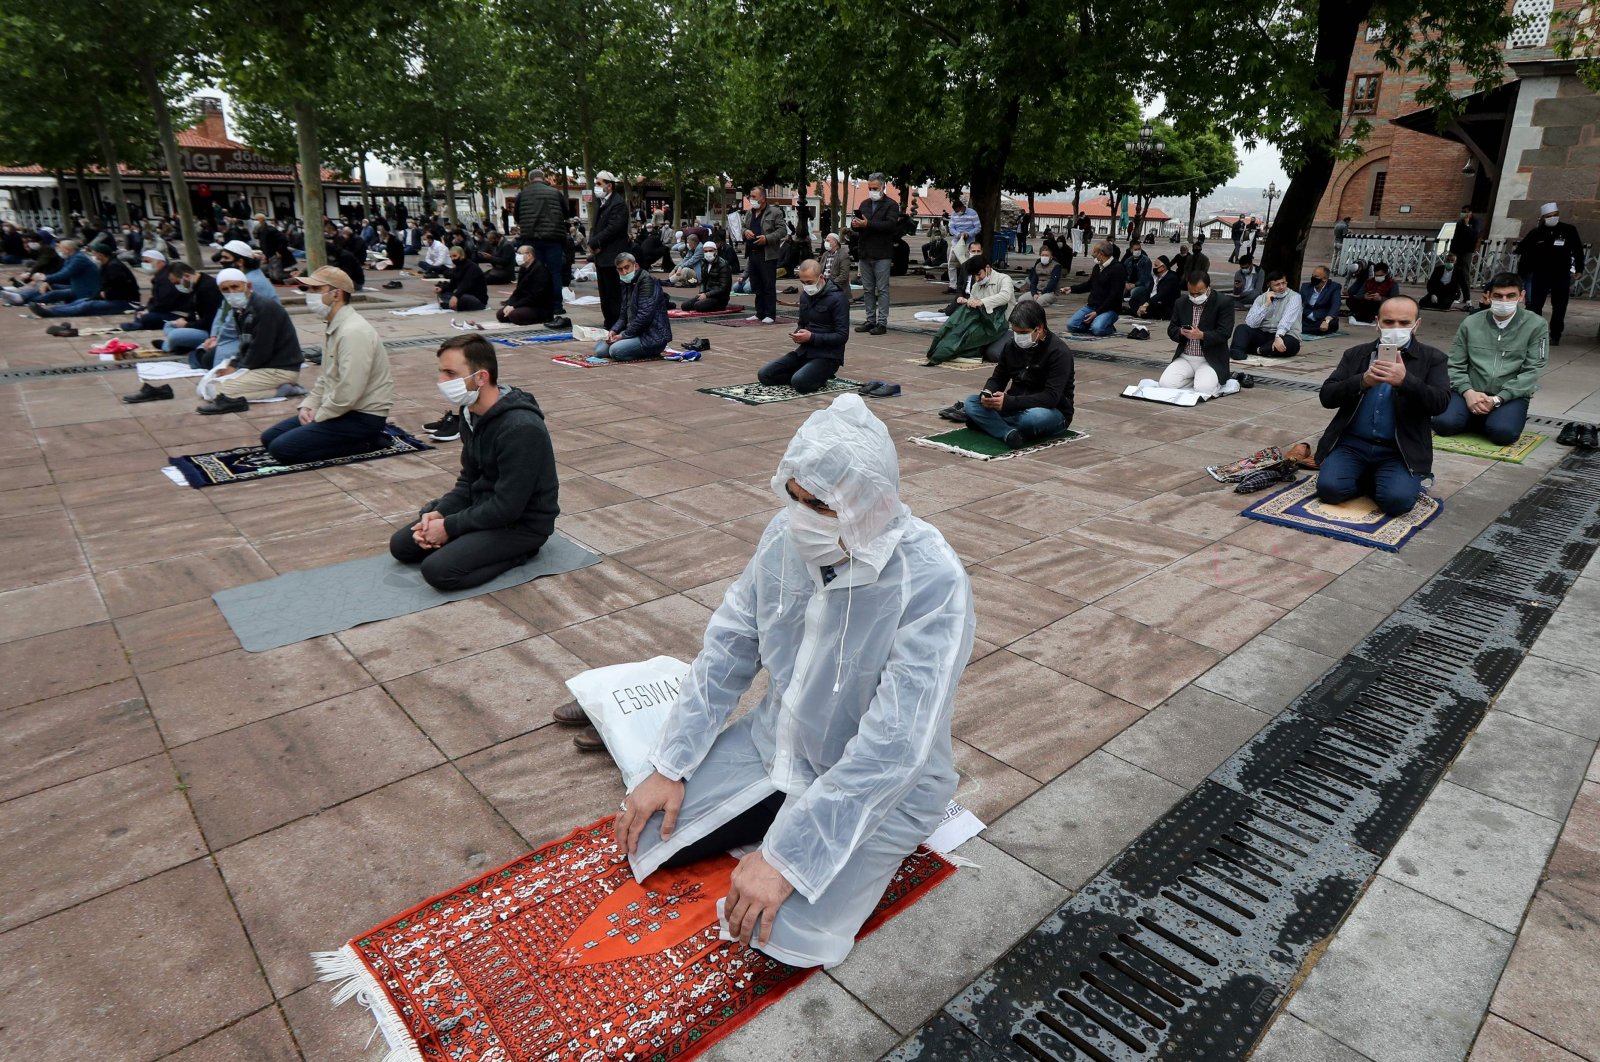 Worshippers wearing protective face masks maintain a required social distance during the Friday prayer outside the historical Hacı Bayram Mosque, in Ankara, Turkey, May 29, 2020. (AFP Photo)